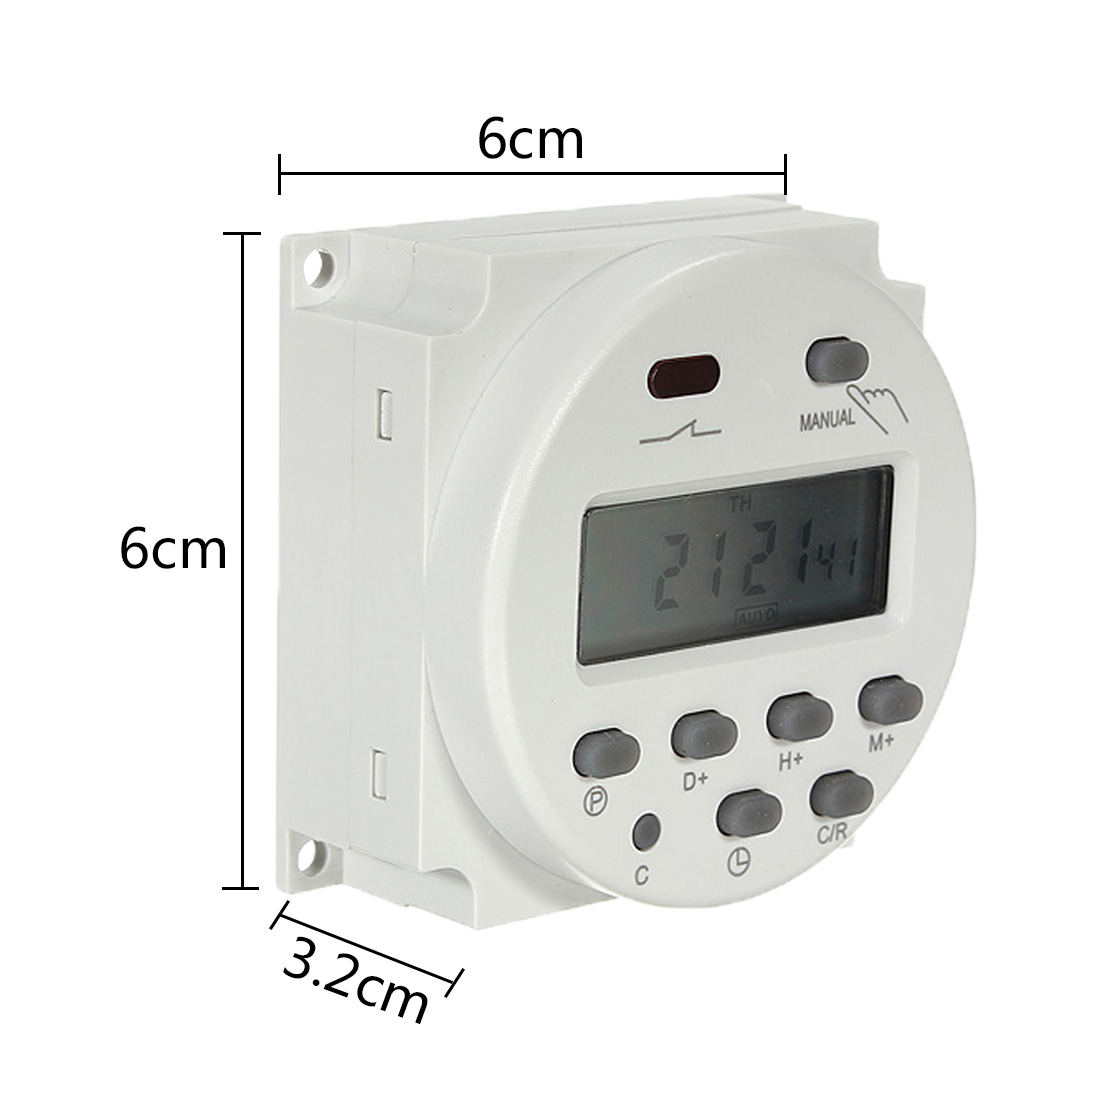 2pcs AC 220V Digital Round Timer Time Switch Support TT-101A